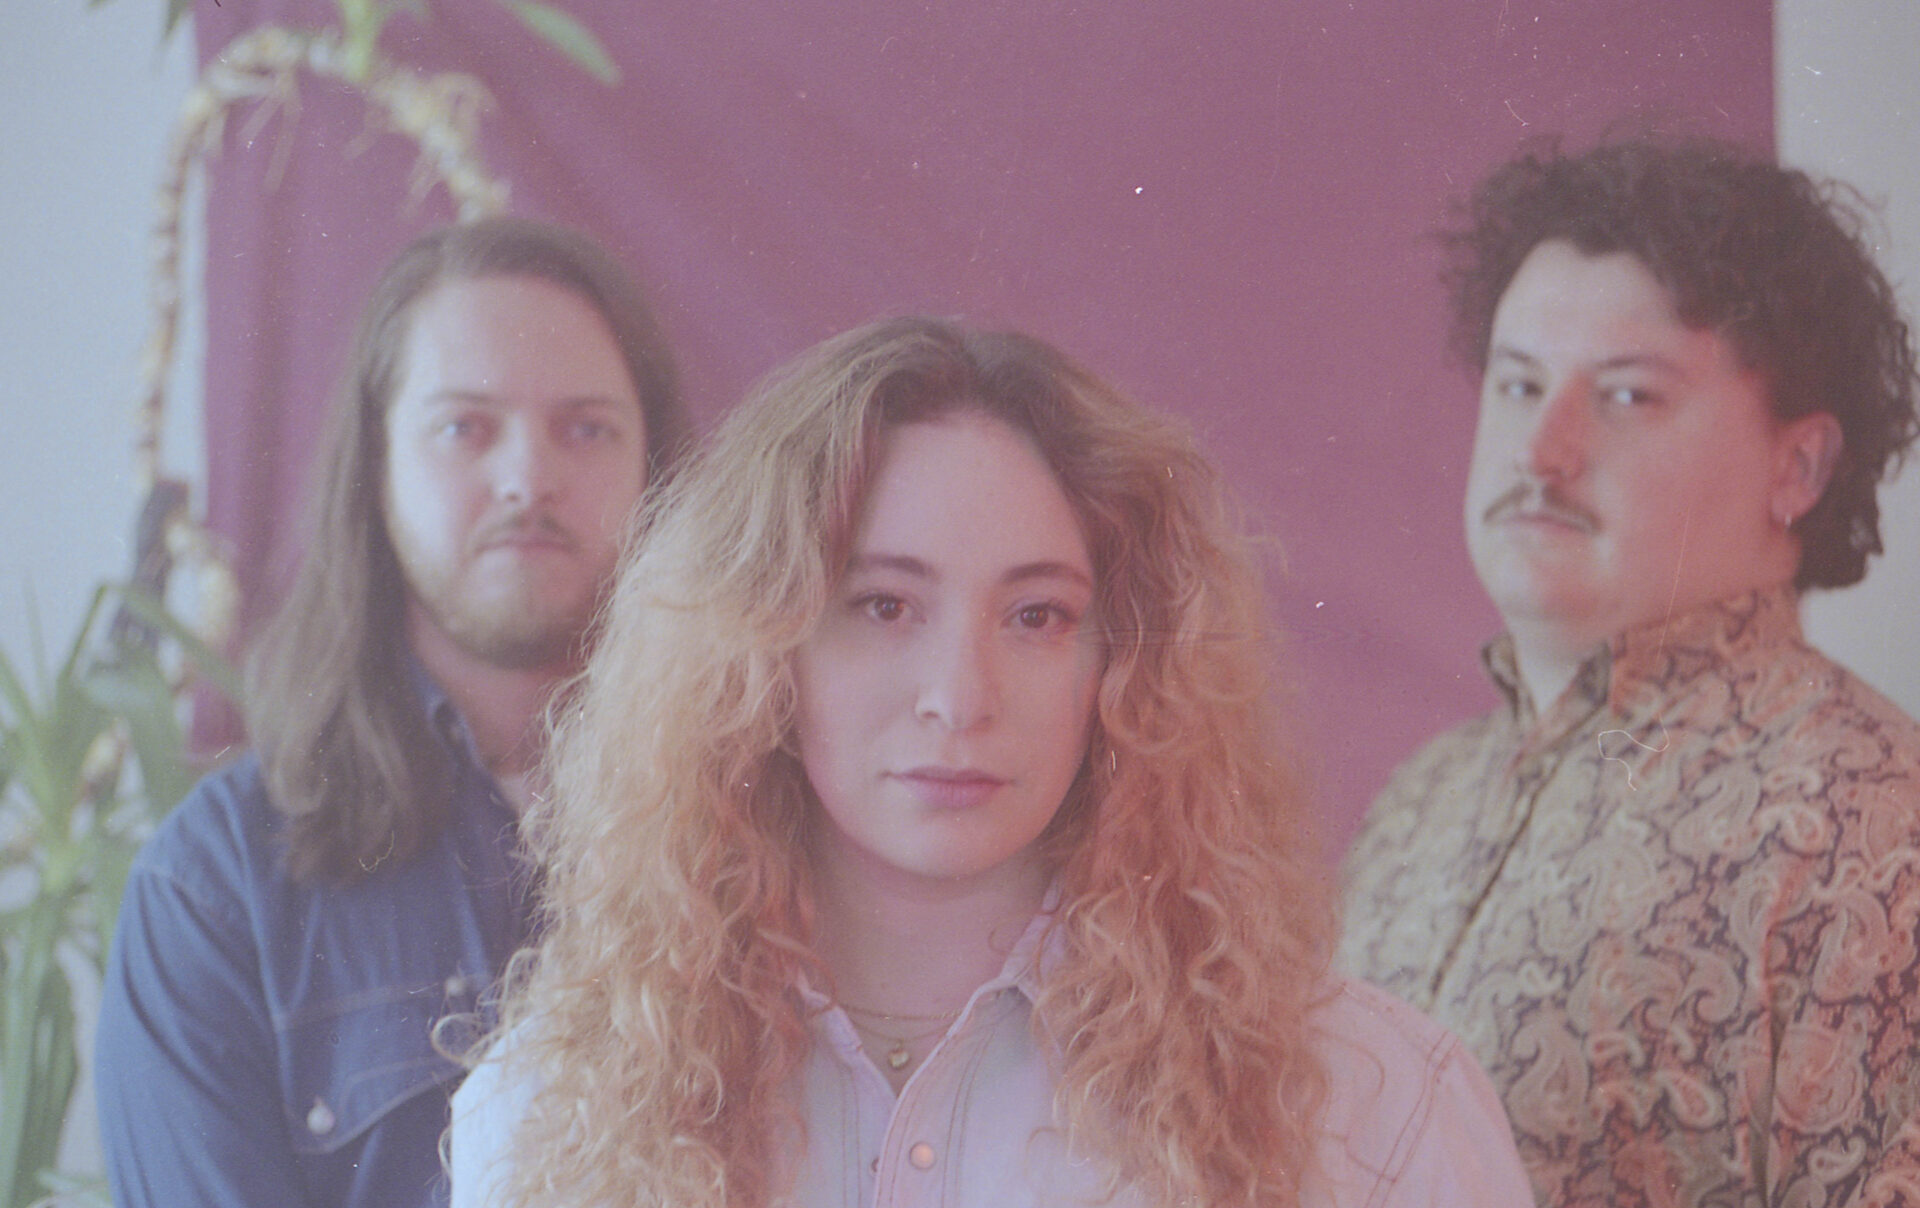 NEWS: Tallies sign to Bella Union and share new single ‘No Dreams Of Fayres’